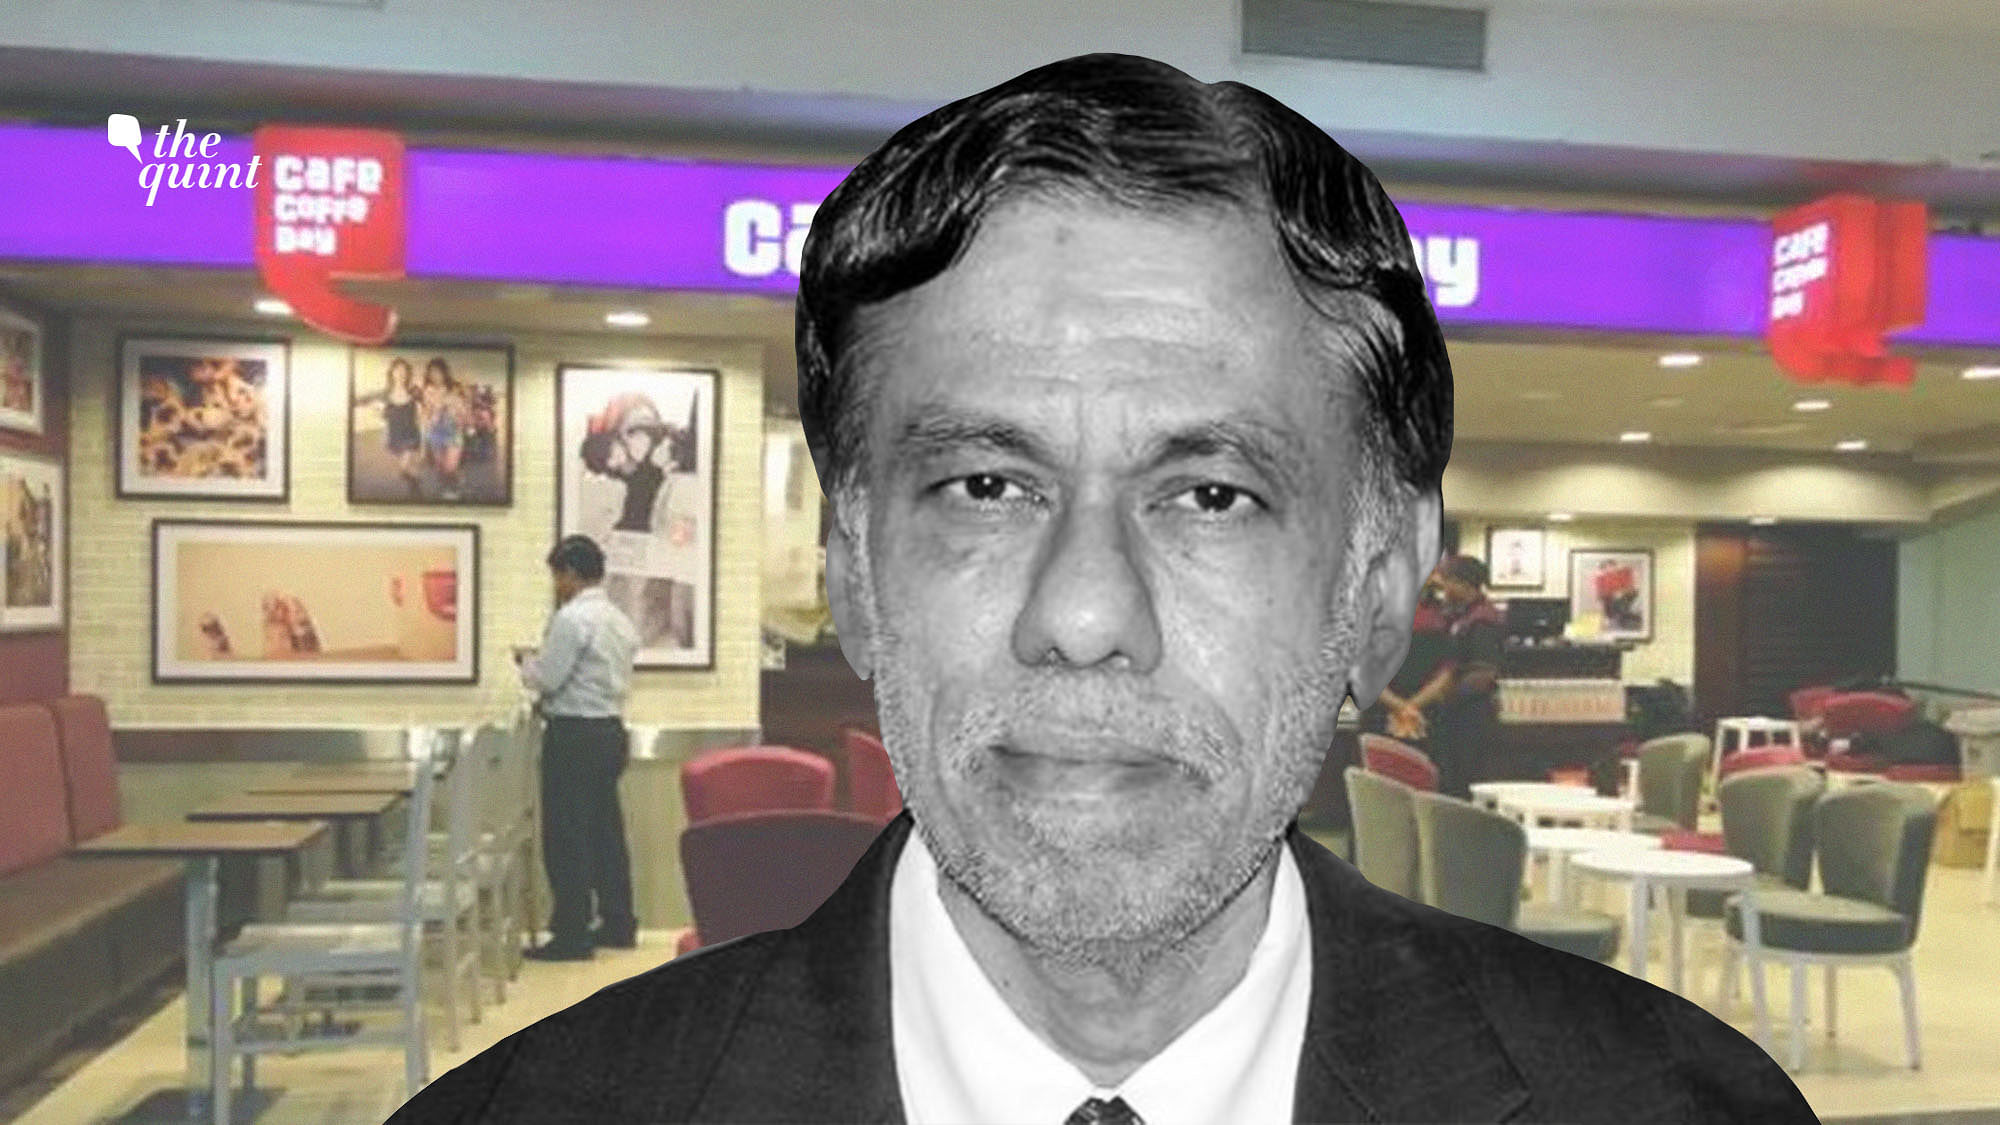 SV Ranganath, former IAS officer and CCD board member,  has been appointed as interim CEO of Cafe Coffee Day.